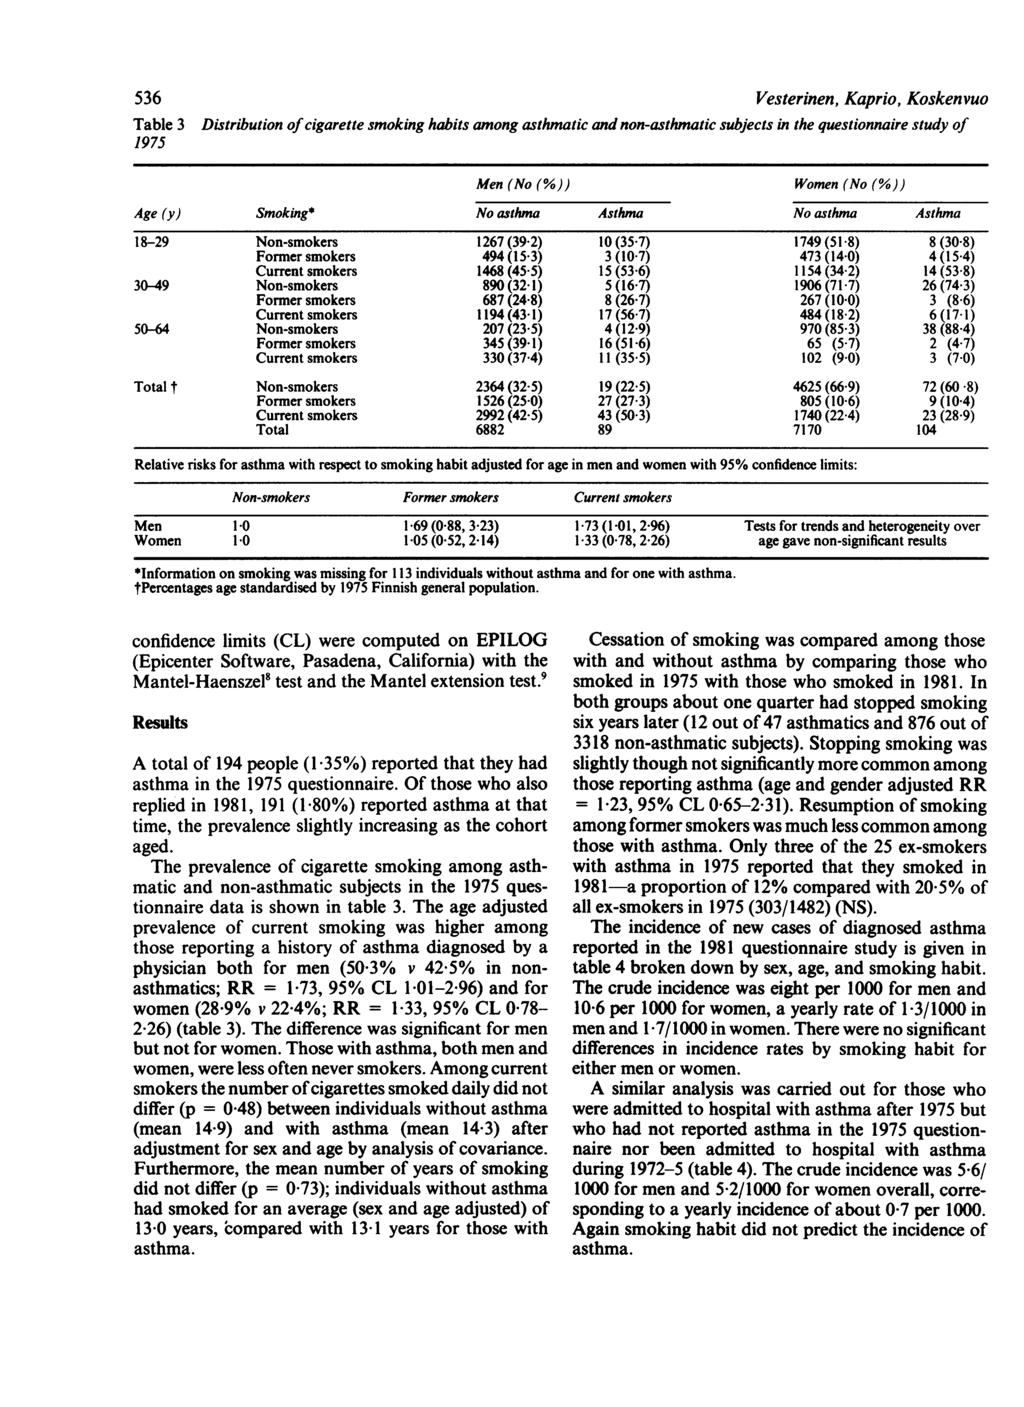 536 Vesterinen, Kaprio, Koskenvuo Table 3 1975 Distribution of cigarette smoking habits among asthmatic and non-asthmatic subjects in the questionnaire study of Men (No (%)) Women (No (%)) Age (y)